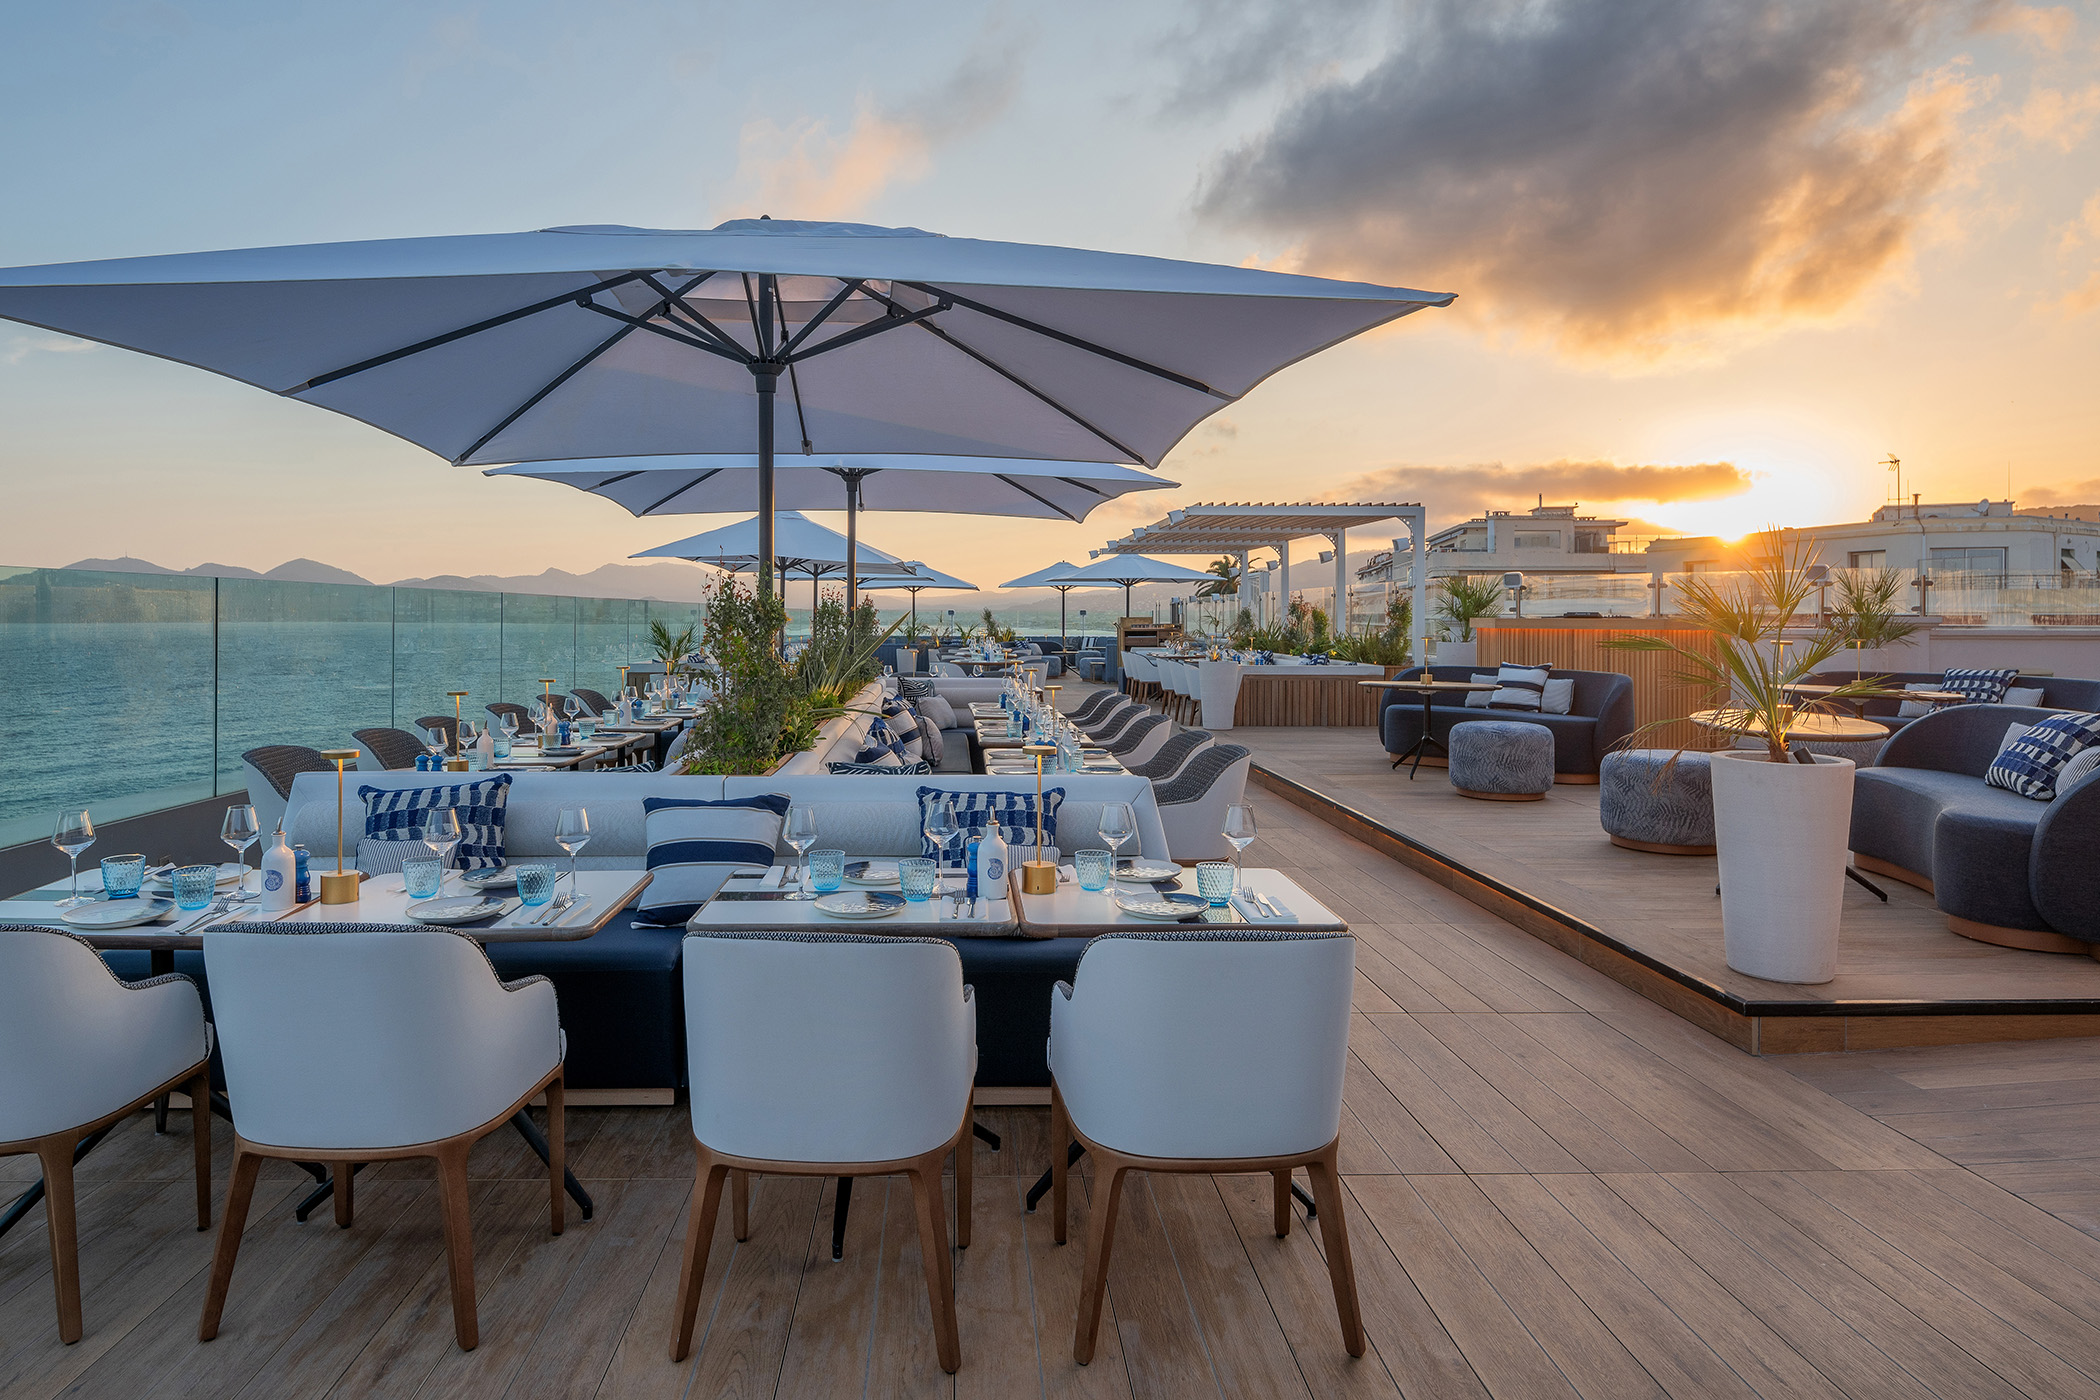 Canopy by Hilton Cannes Marea Rooftop at Sunset